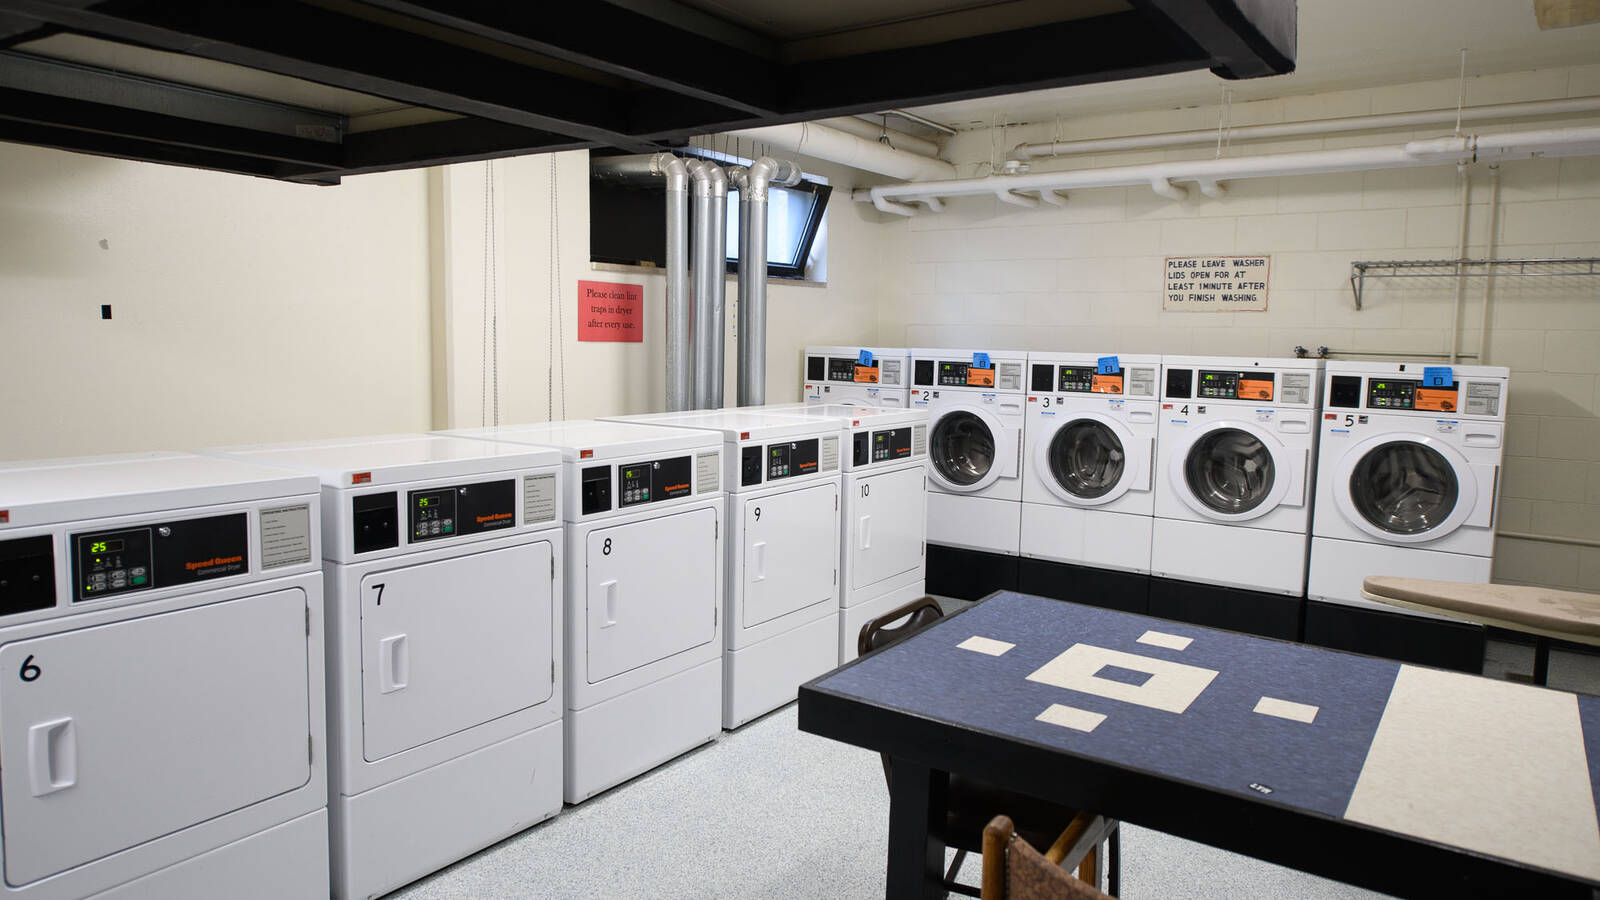 Laundry room featuring multiple commercial washing machines and dryers, plus a table and chairs